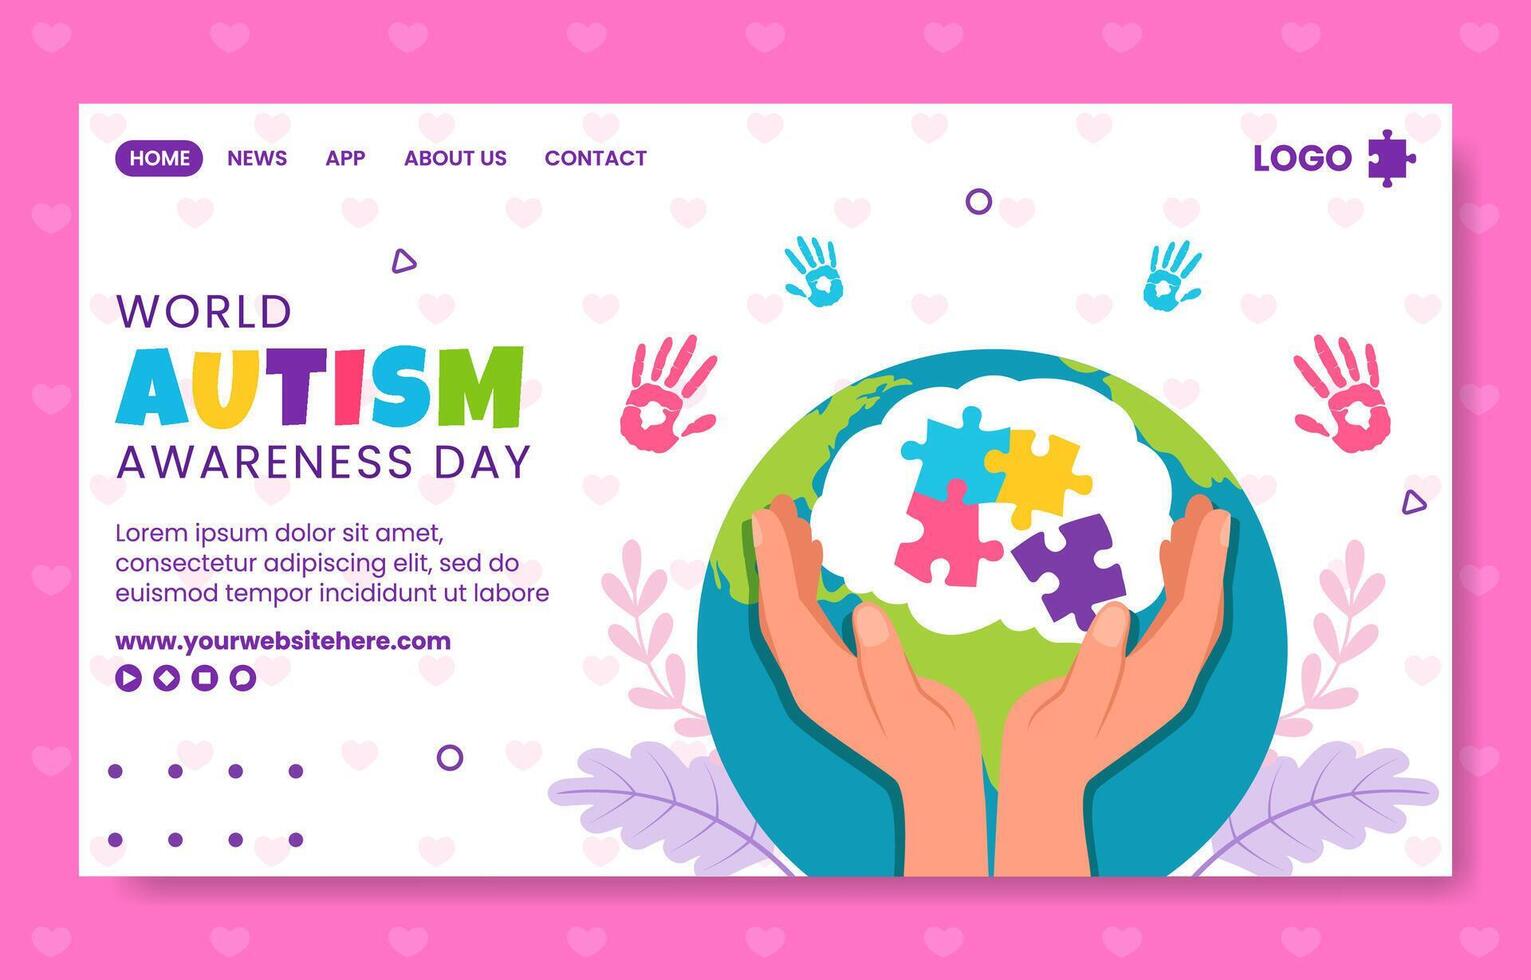 Autism Awareness Day Social Media Landing Page Cartoon Hand Drawn Templates Background Illustration vector